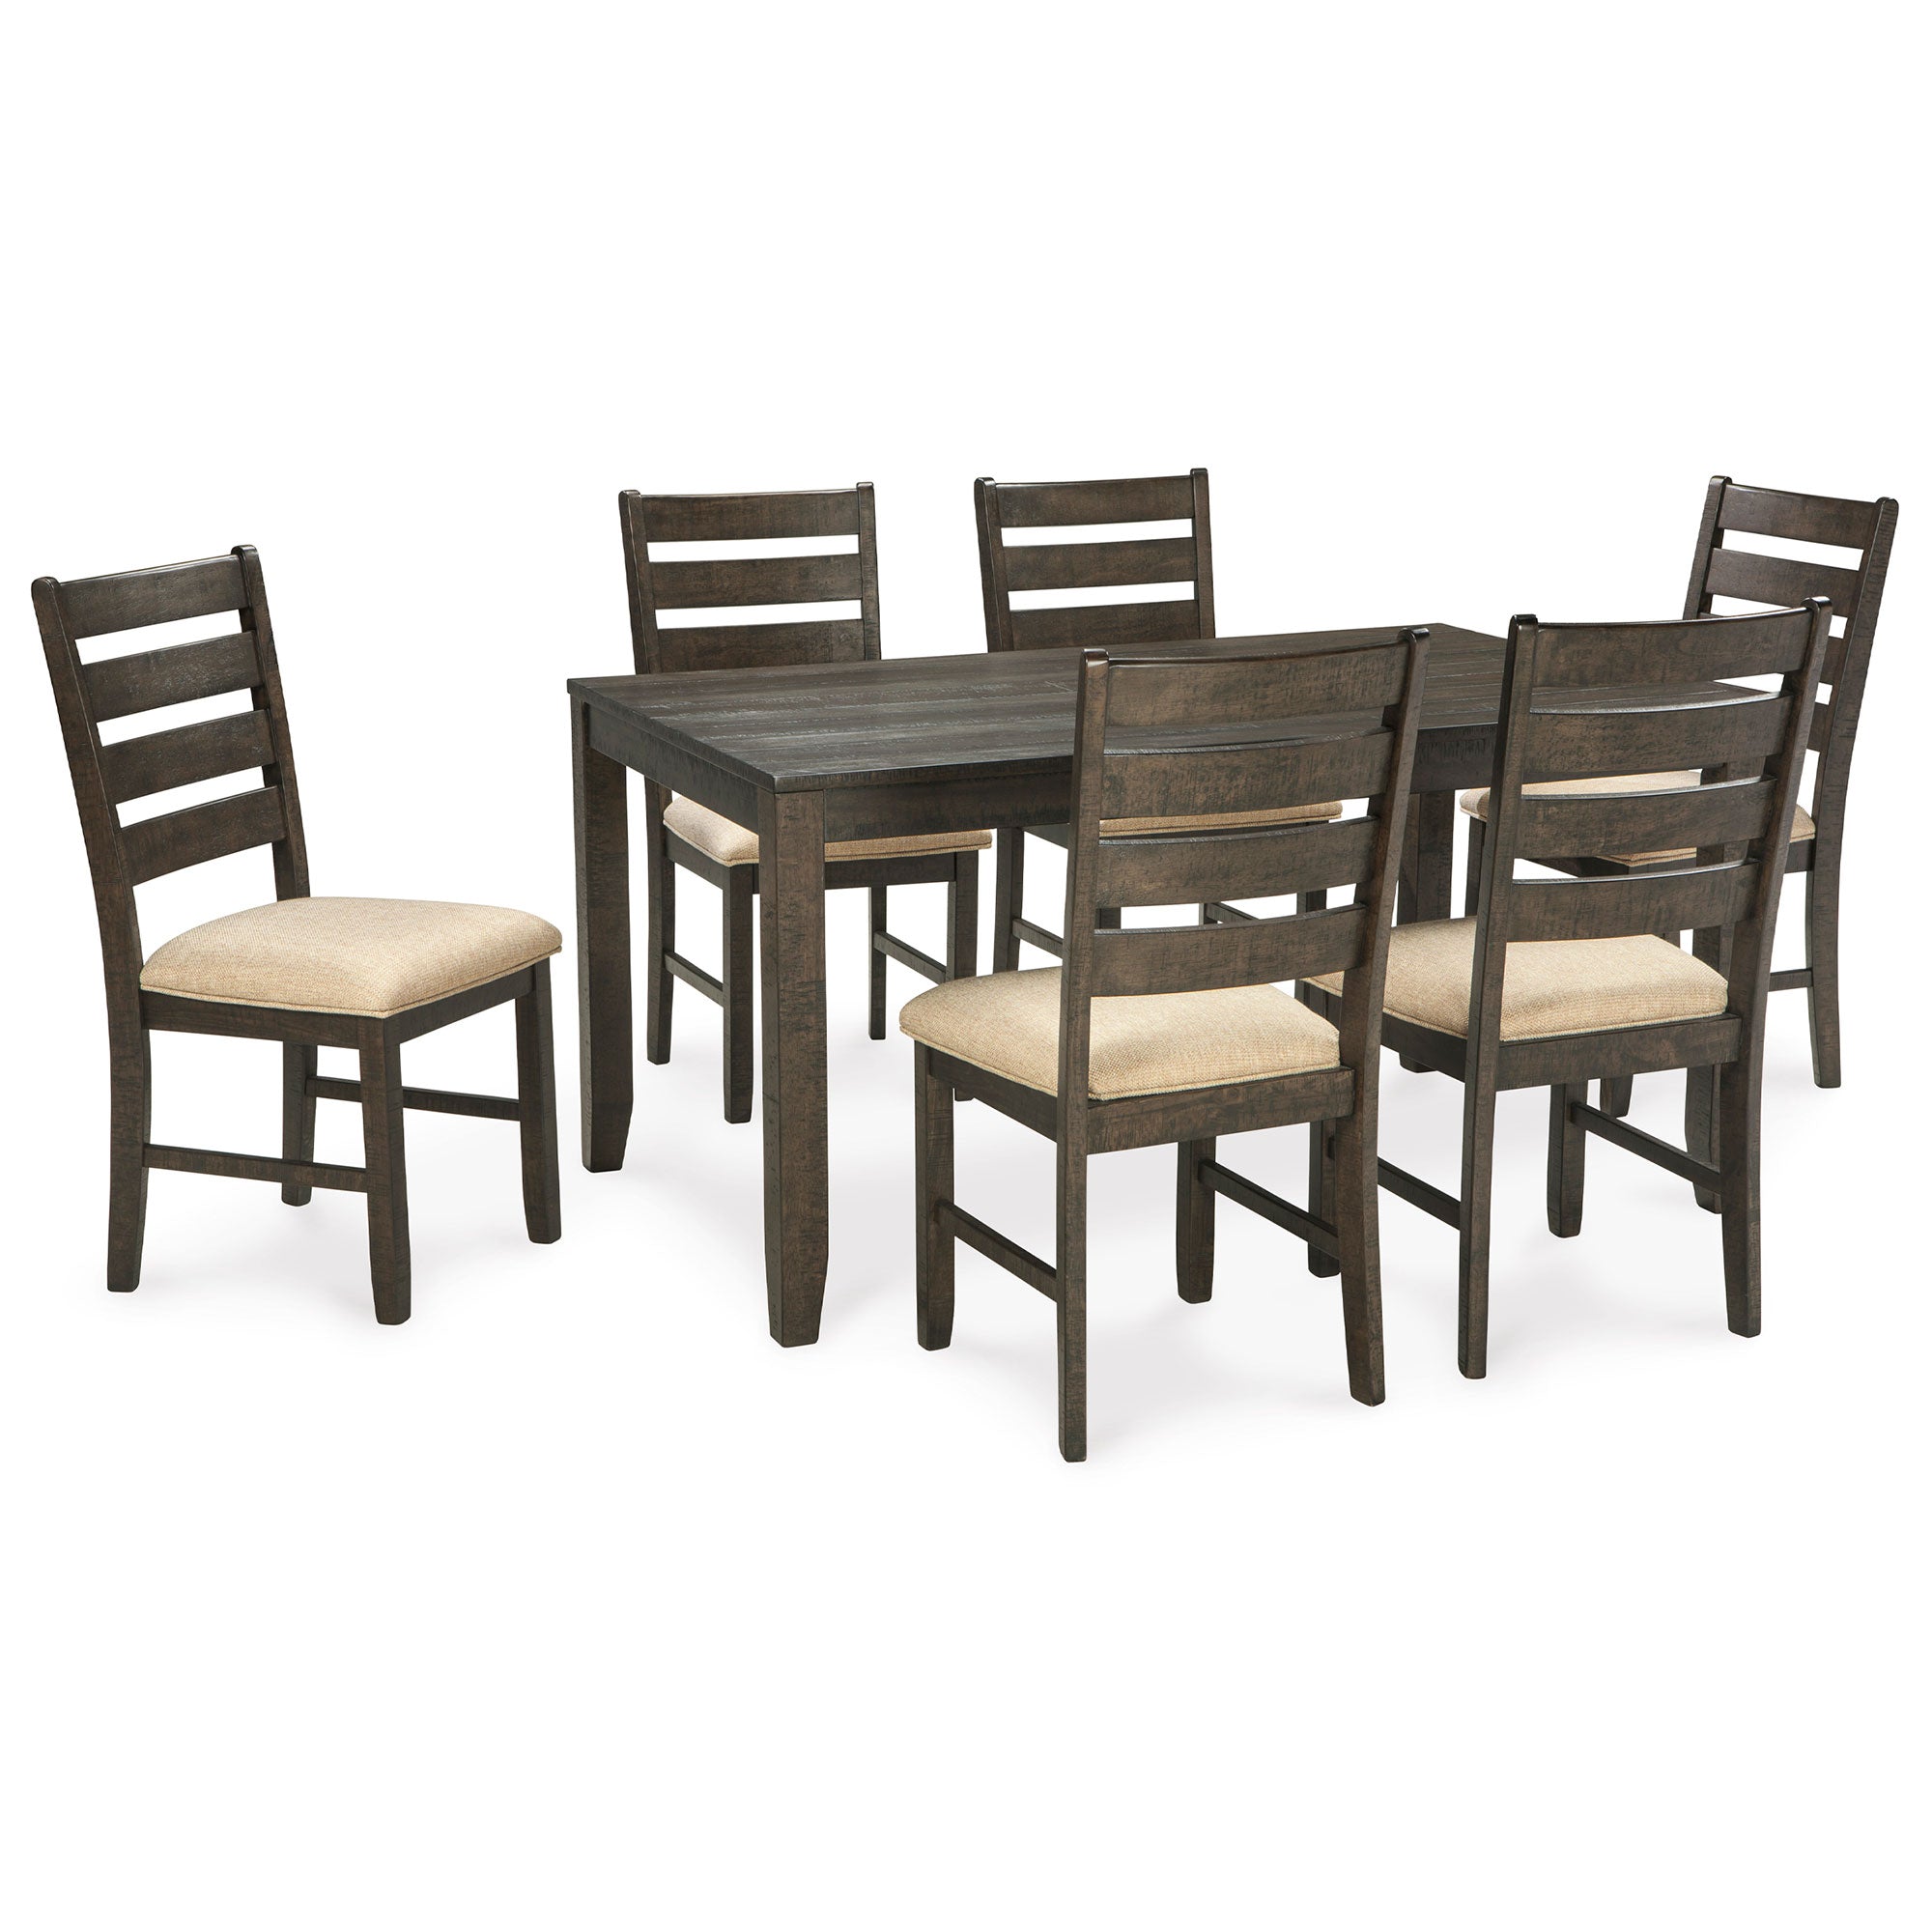 Rokane Dining Room Table and Chairs (Set of 7)